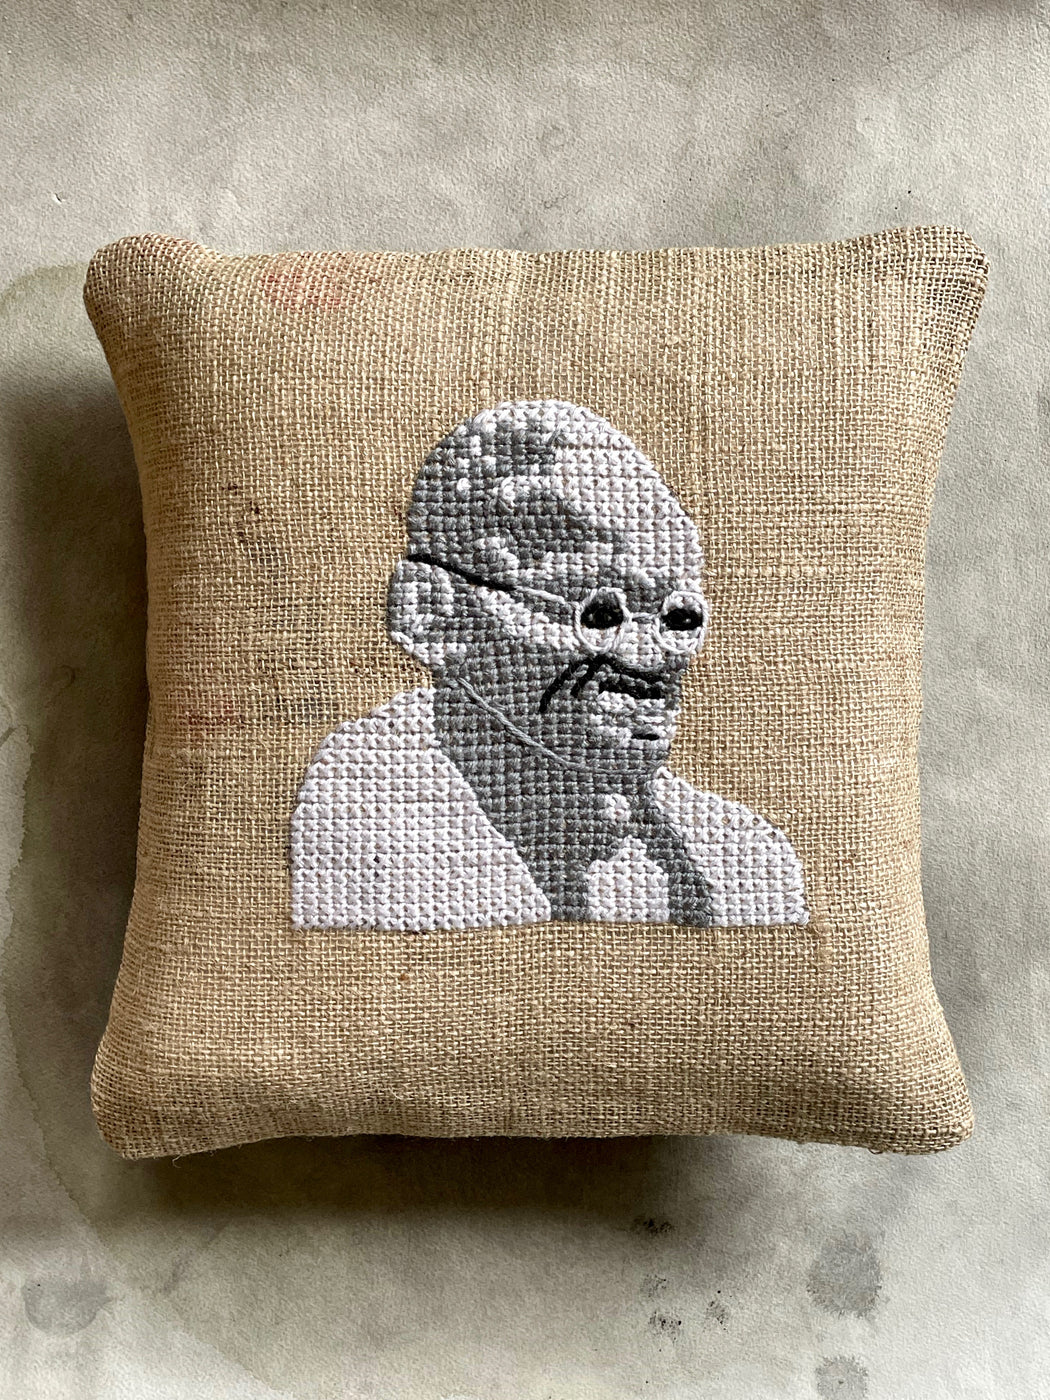 "Gandhi" Hand-Embroidered Pillow